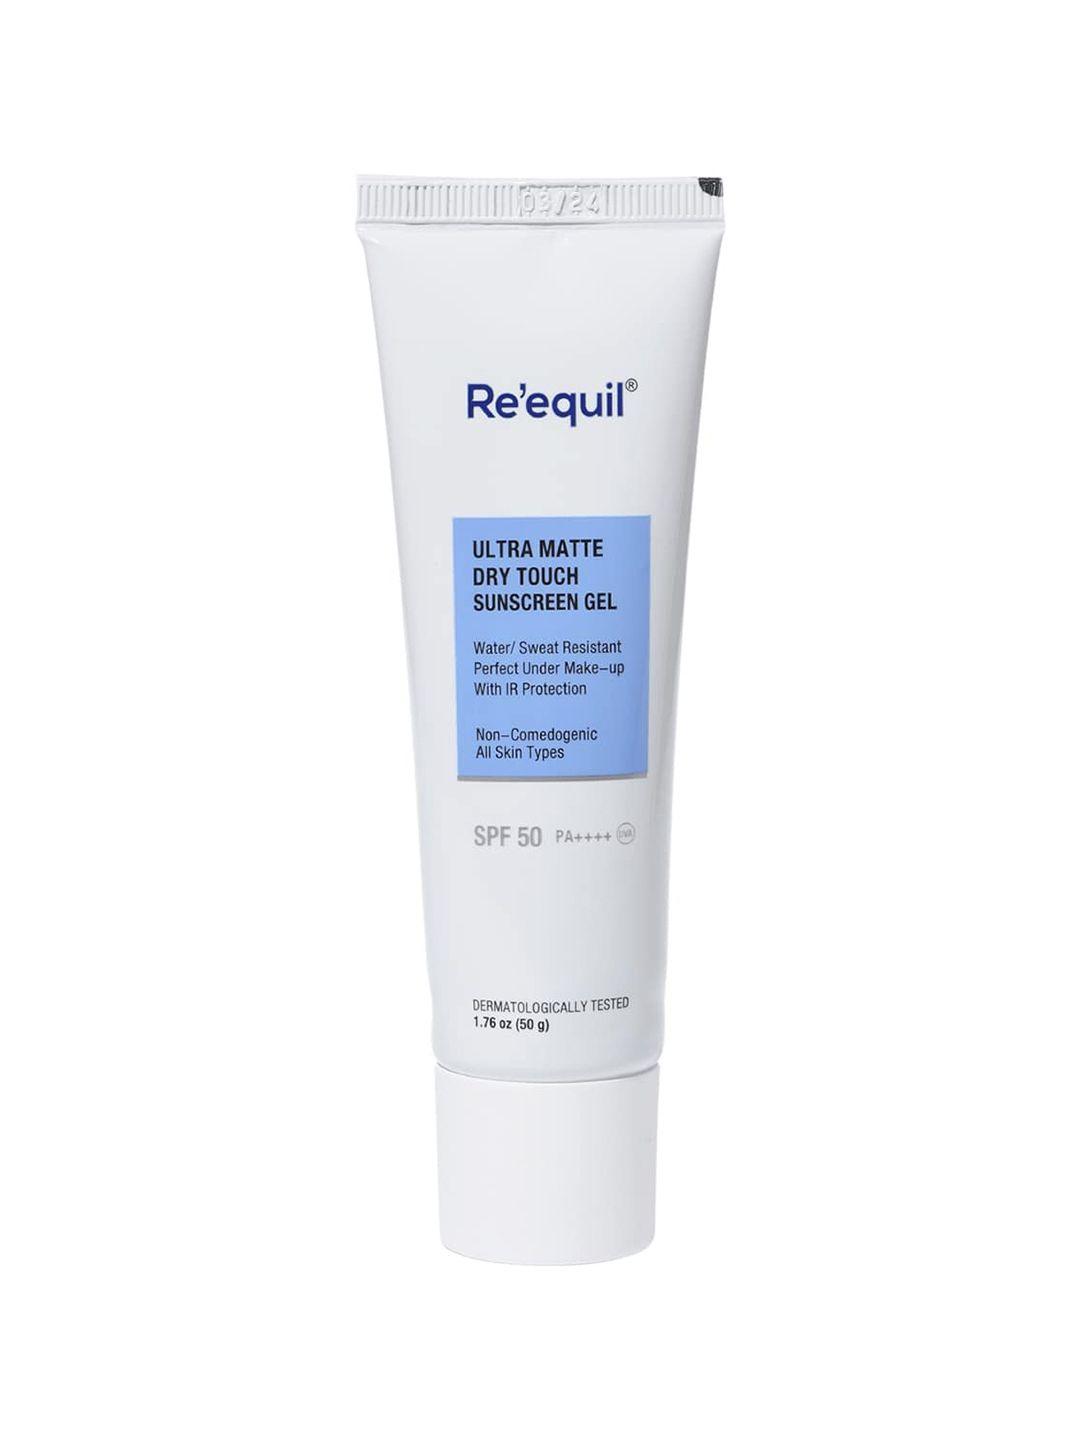 reequil-ultra-matte-dry-touch-sunscreen-gel-spf-50-pa++++-50g